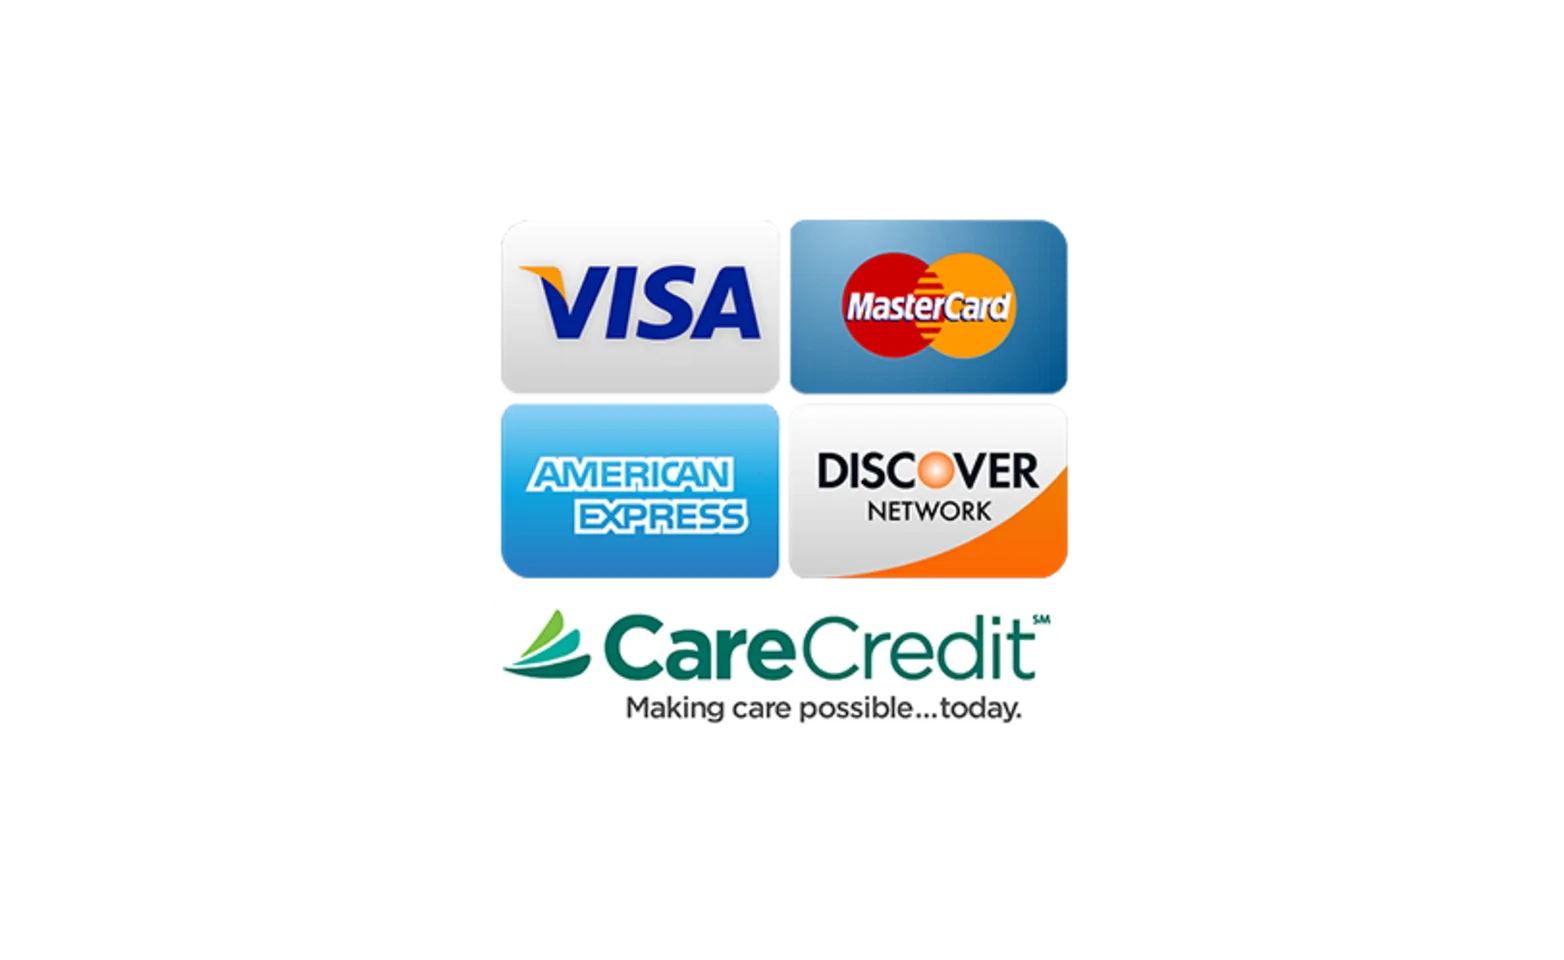 Logos of Visa, Mastercard, American Express, Discover Network, and Care Credit